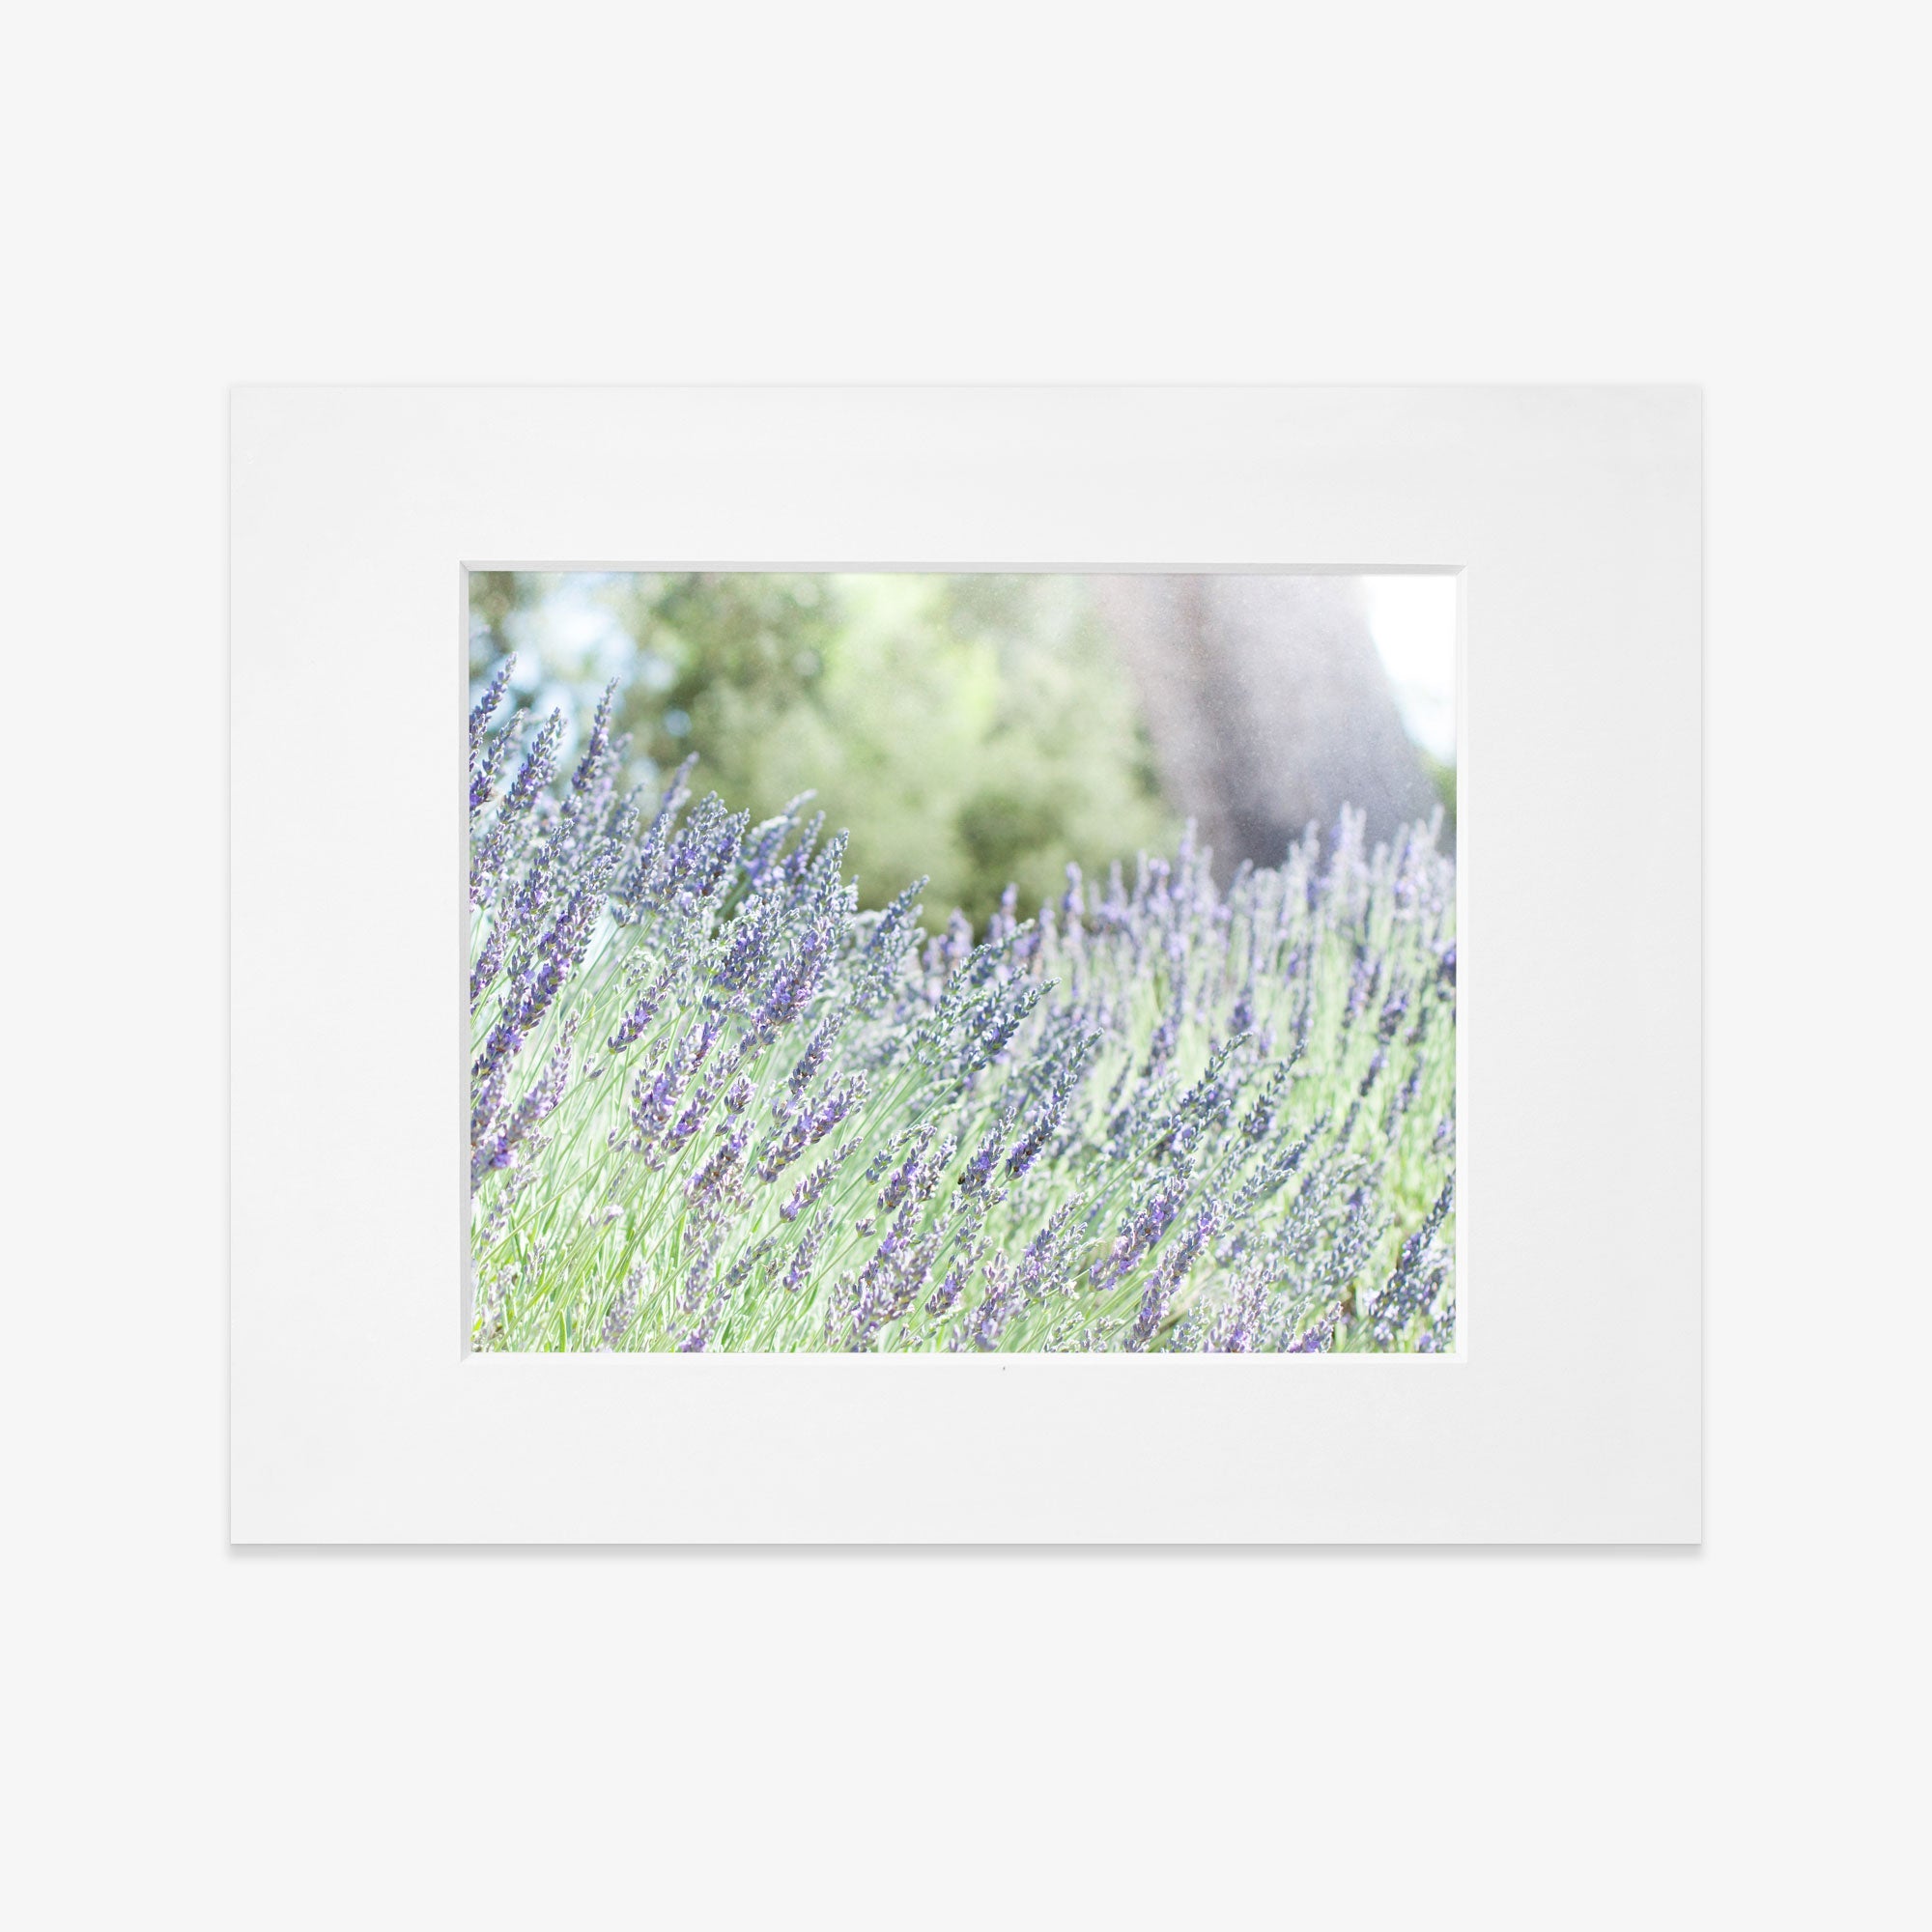 A white-framed photograph depicts a field of blooming lavender flowers with purple hues on green stems. The background is blurred, highlighting the vibrant lavender in the foreground, creating a serene and calming scene. This exquisite piece of art, Rustic Floral Print, &#39;Fields of Lavender&#39; by Offley Green, brings tranquility to any space.